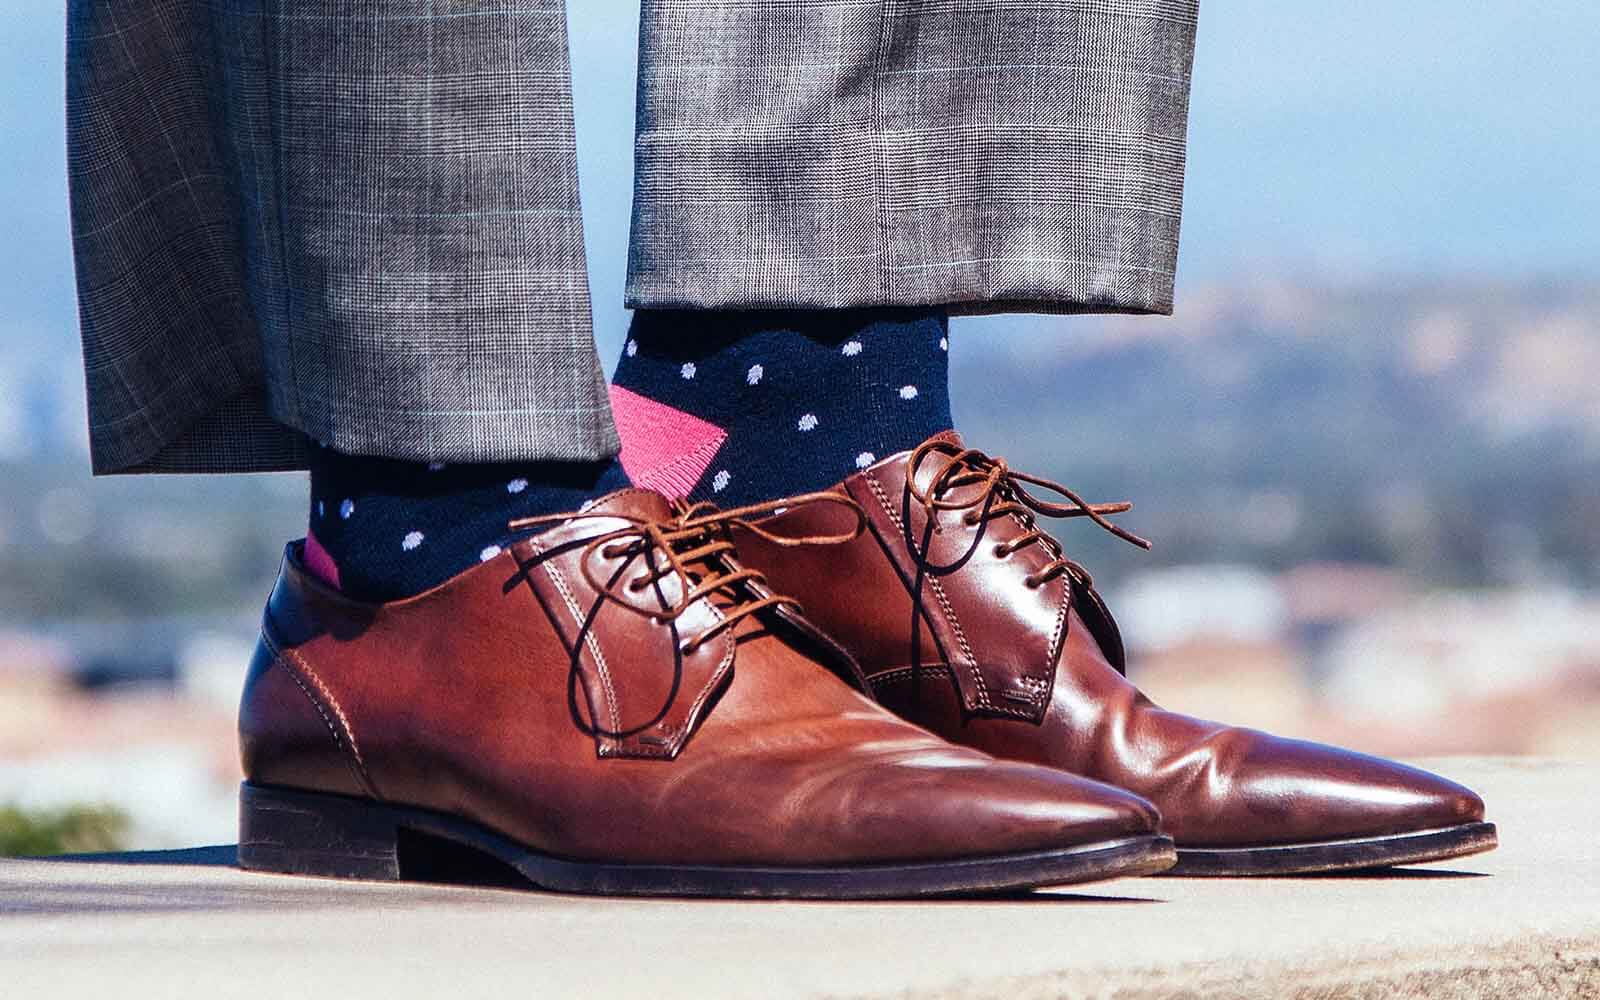 dress socks with sneakers